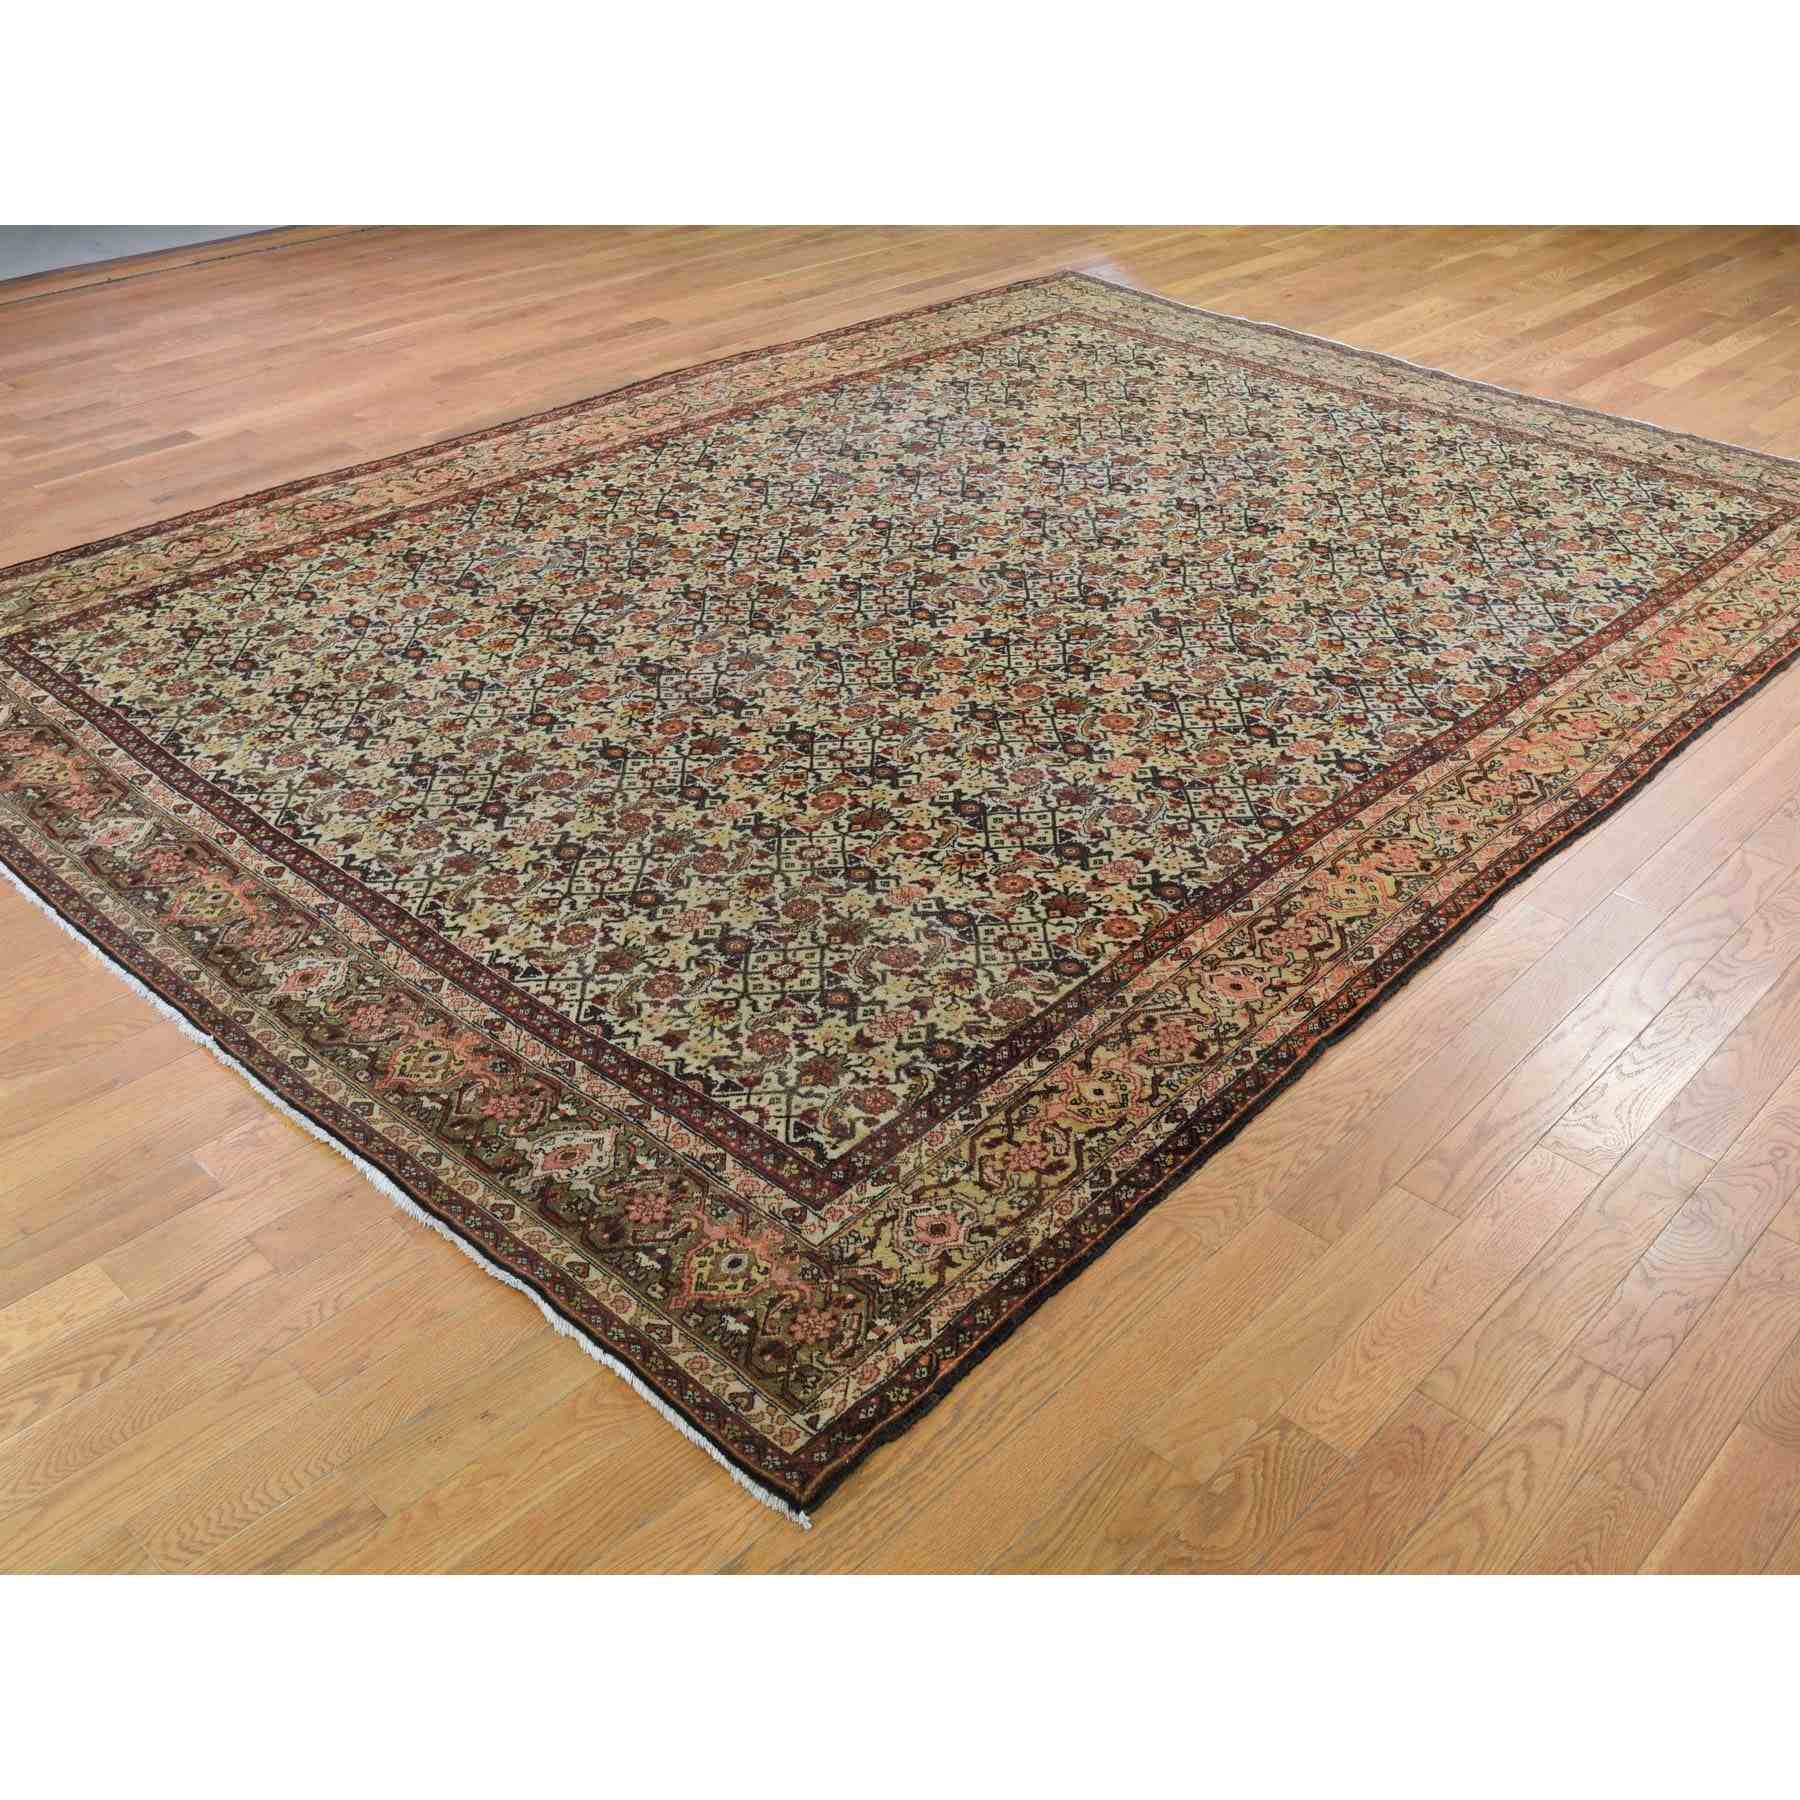 Antique-Hand-Knotted-Rug-239920